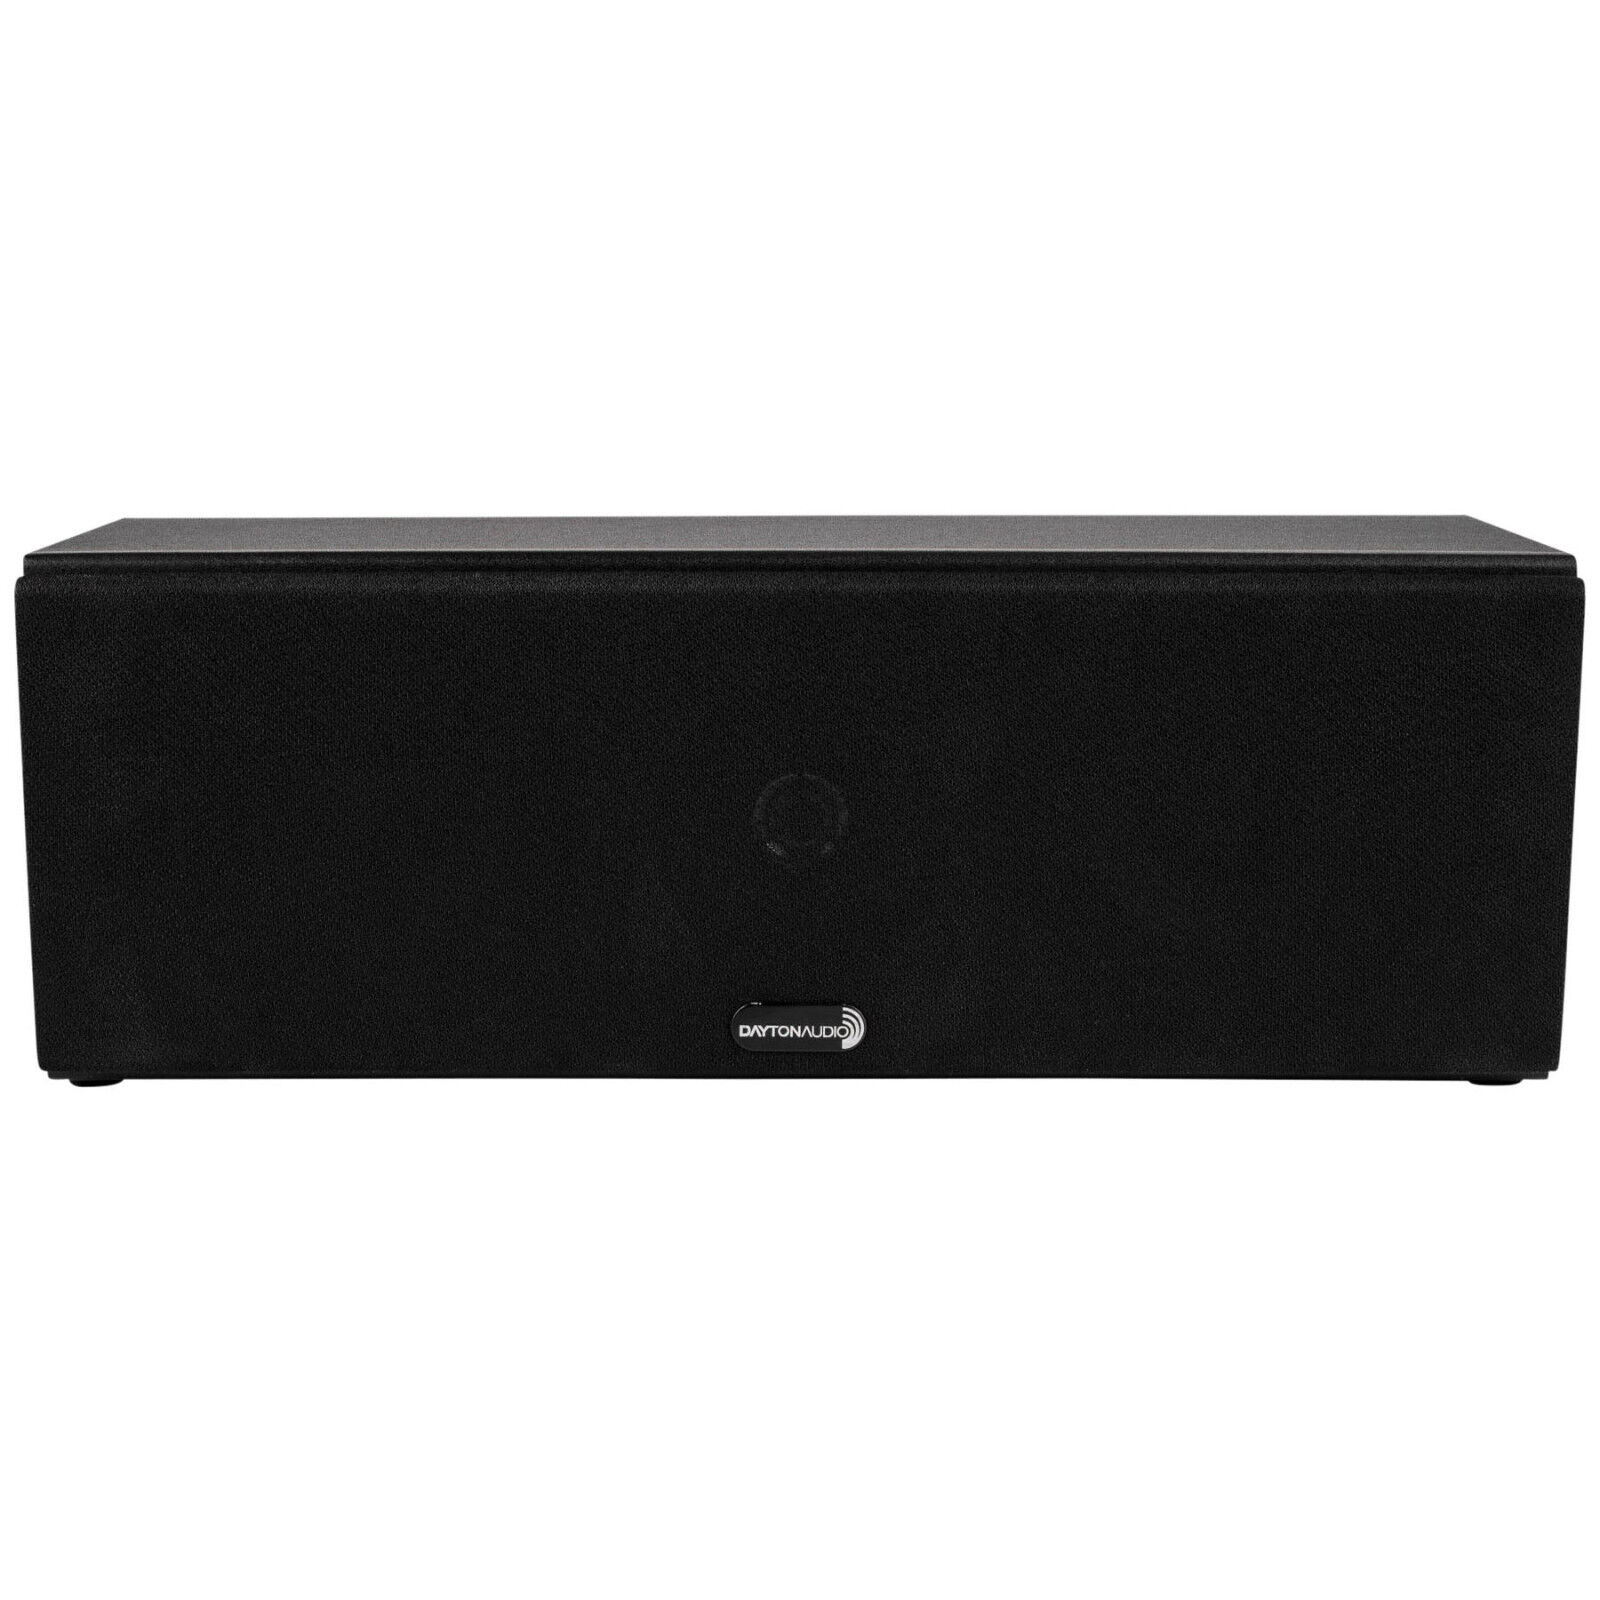 NEW Center Channel Speaker.Home Theater Surround Sound Audio.Middle 150w.LCR